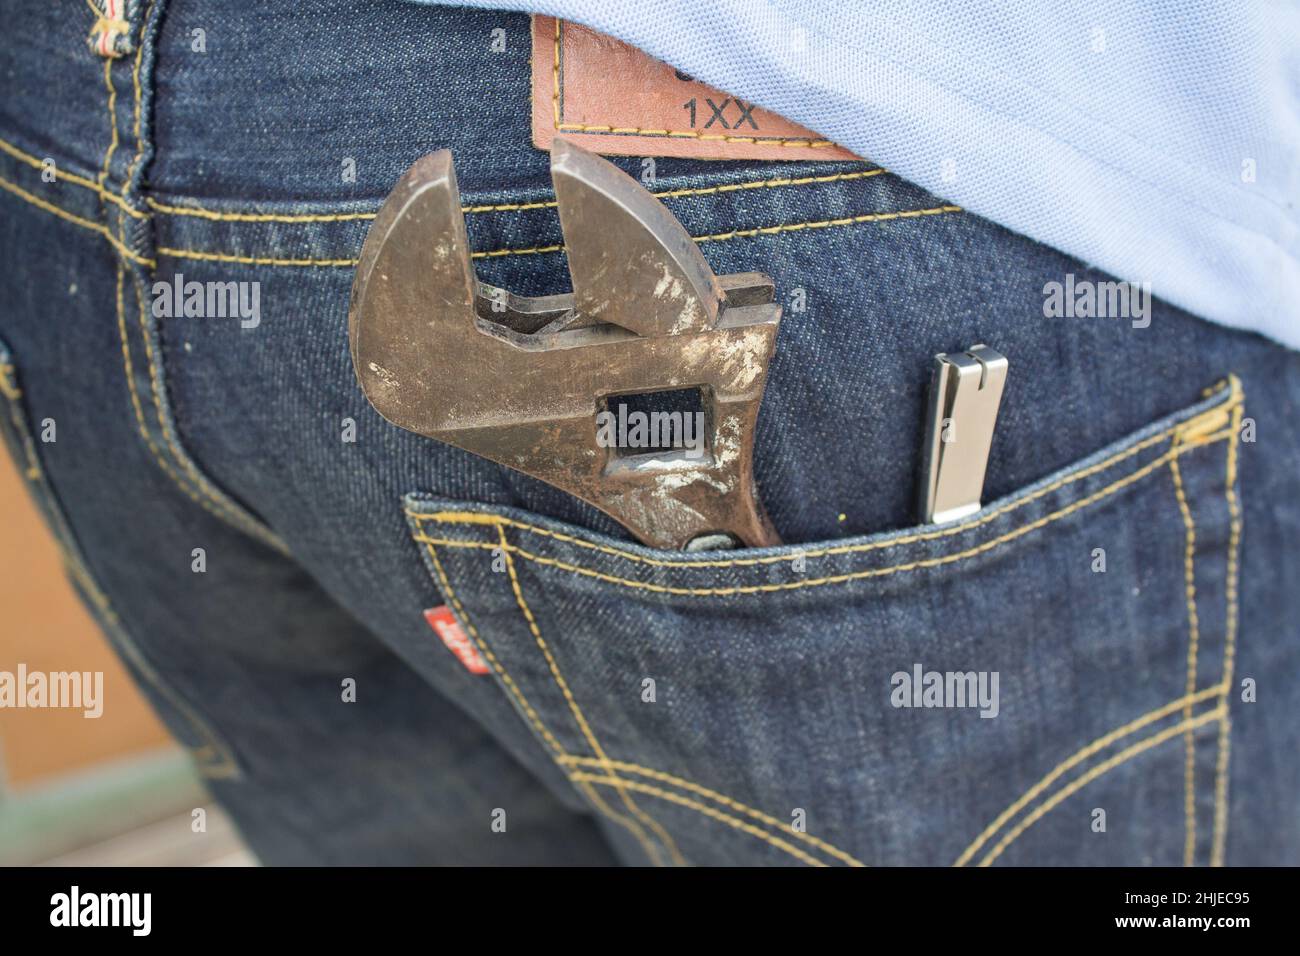 Wrench in the back pocket of jeans. Large and small wrenches as a father and son symbol. Fathers day background with dad- wrench and son - wrench. Hap Stock Photo